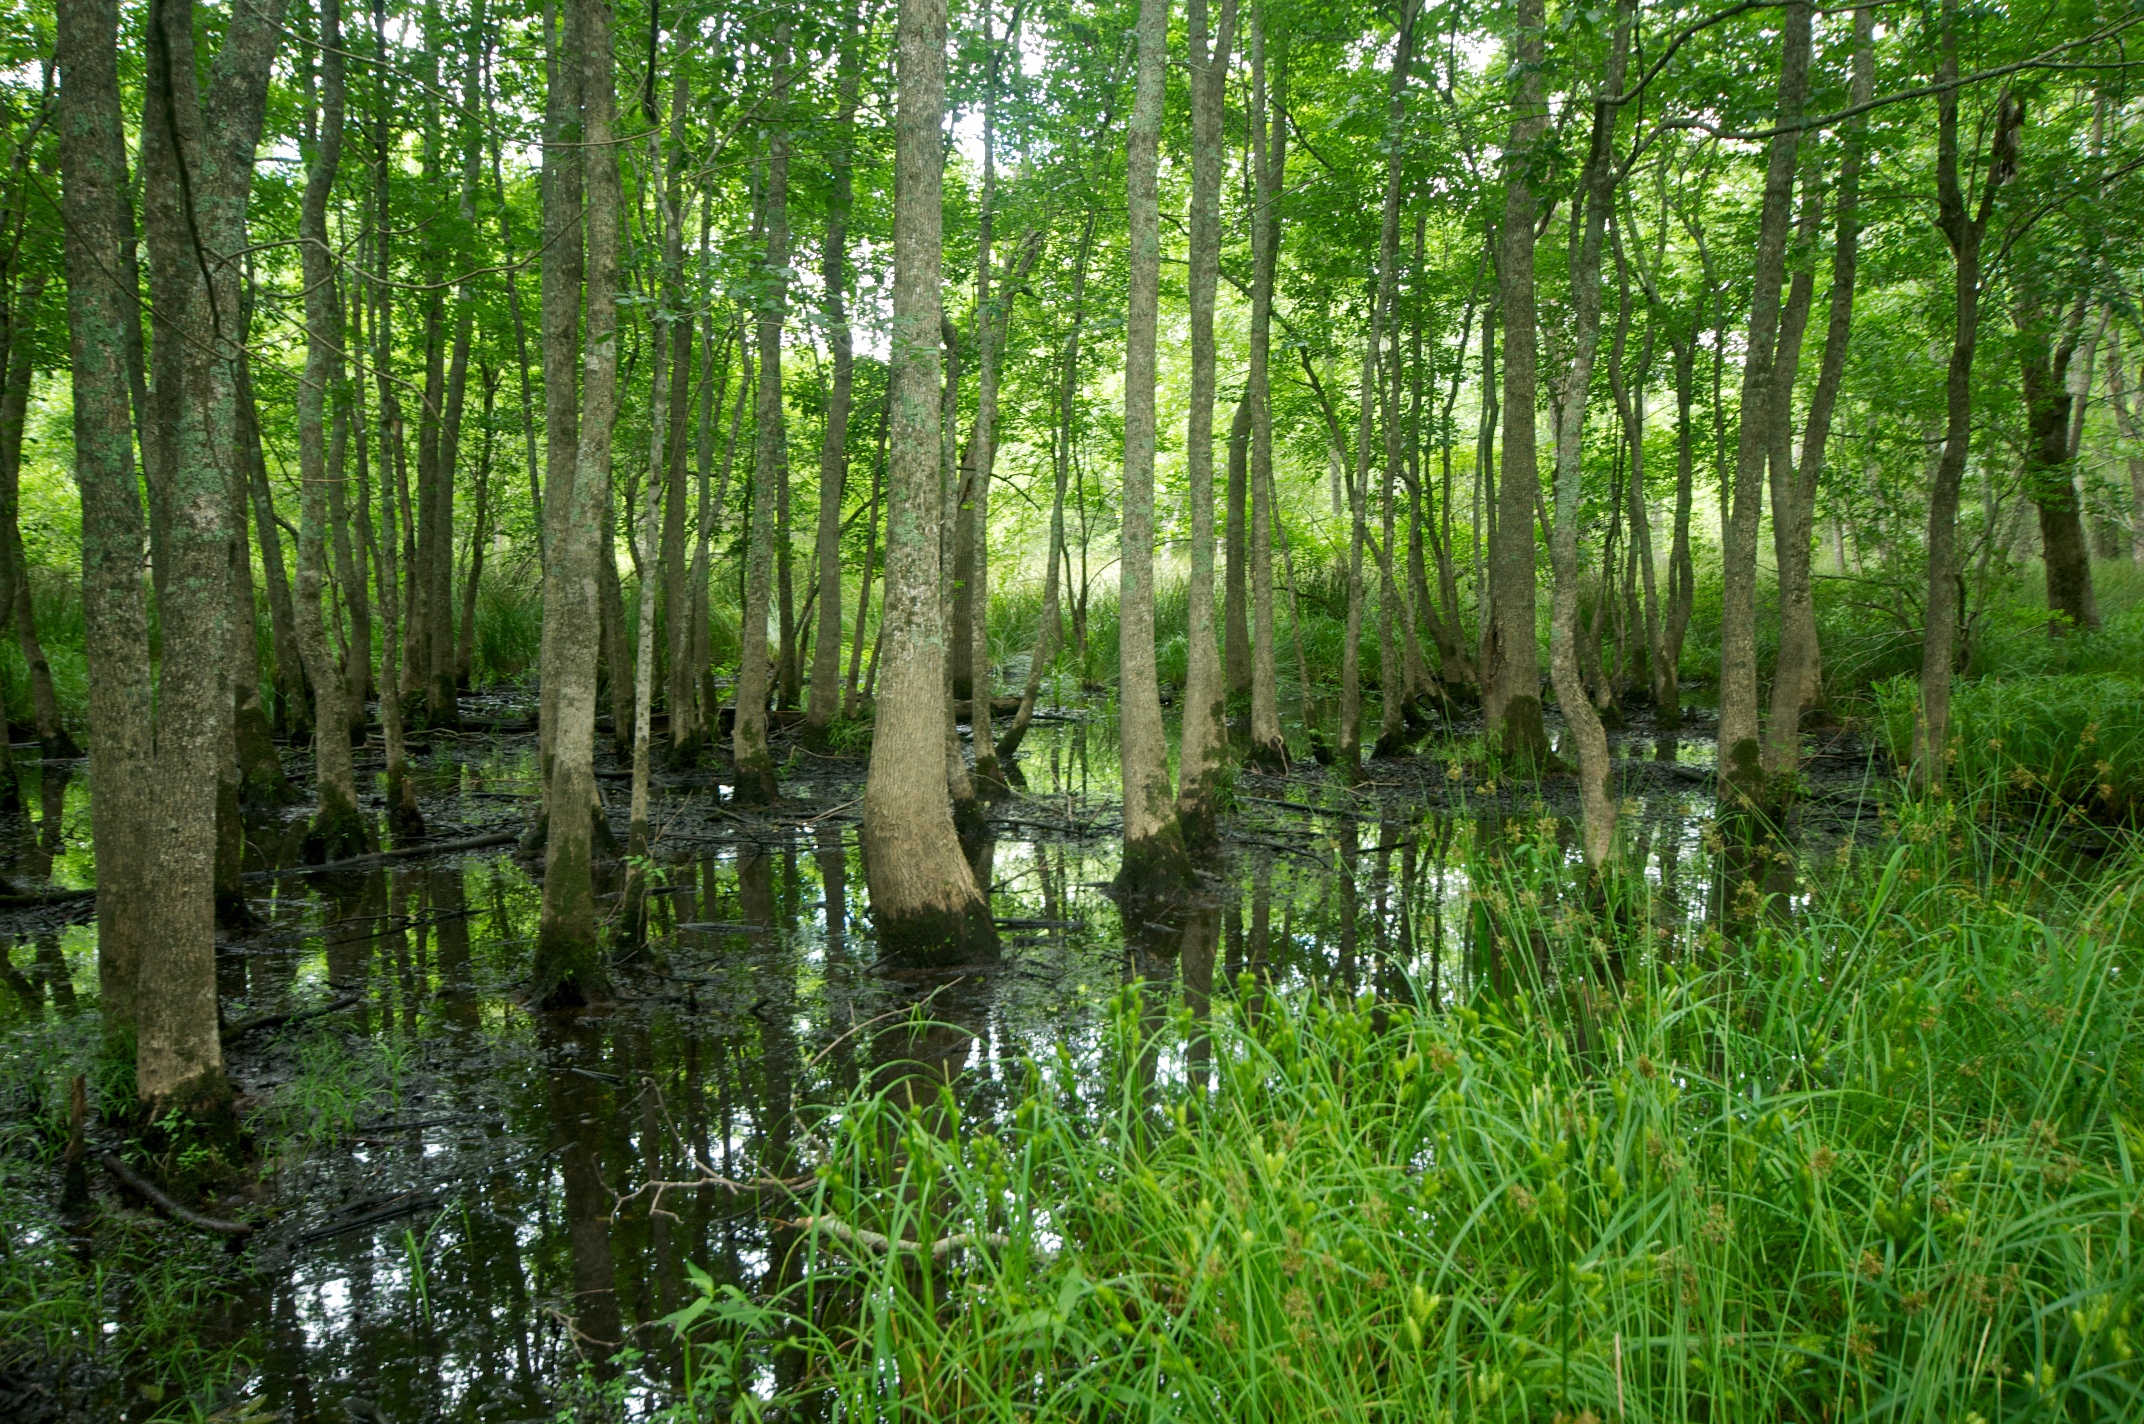 Trees of the bottomland hardwood forest